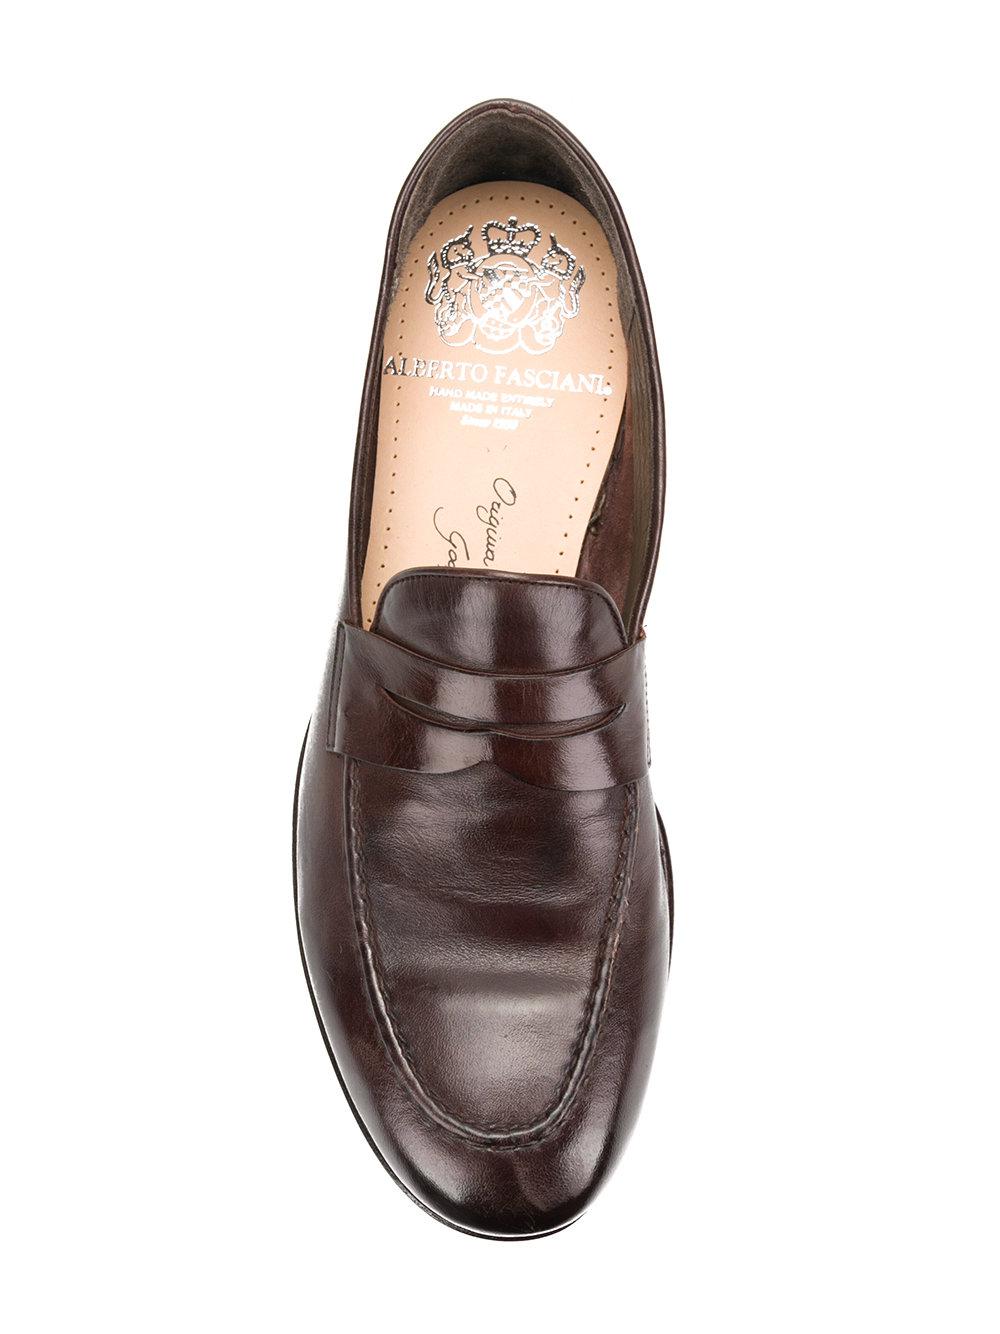 Alberto Fasciani Leather Classic Slip-on Loafers in Brown for Men - Lyst